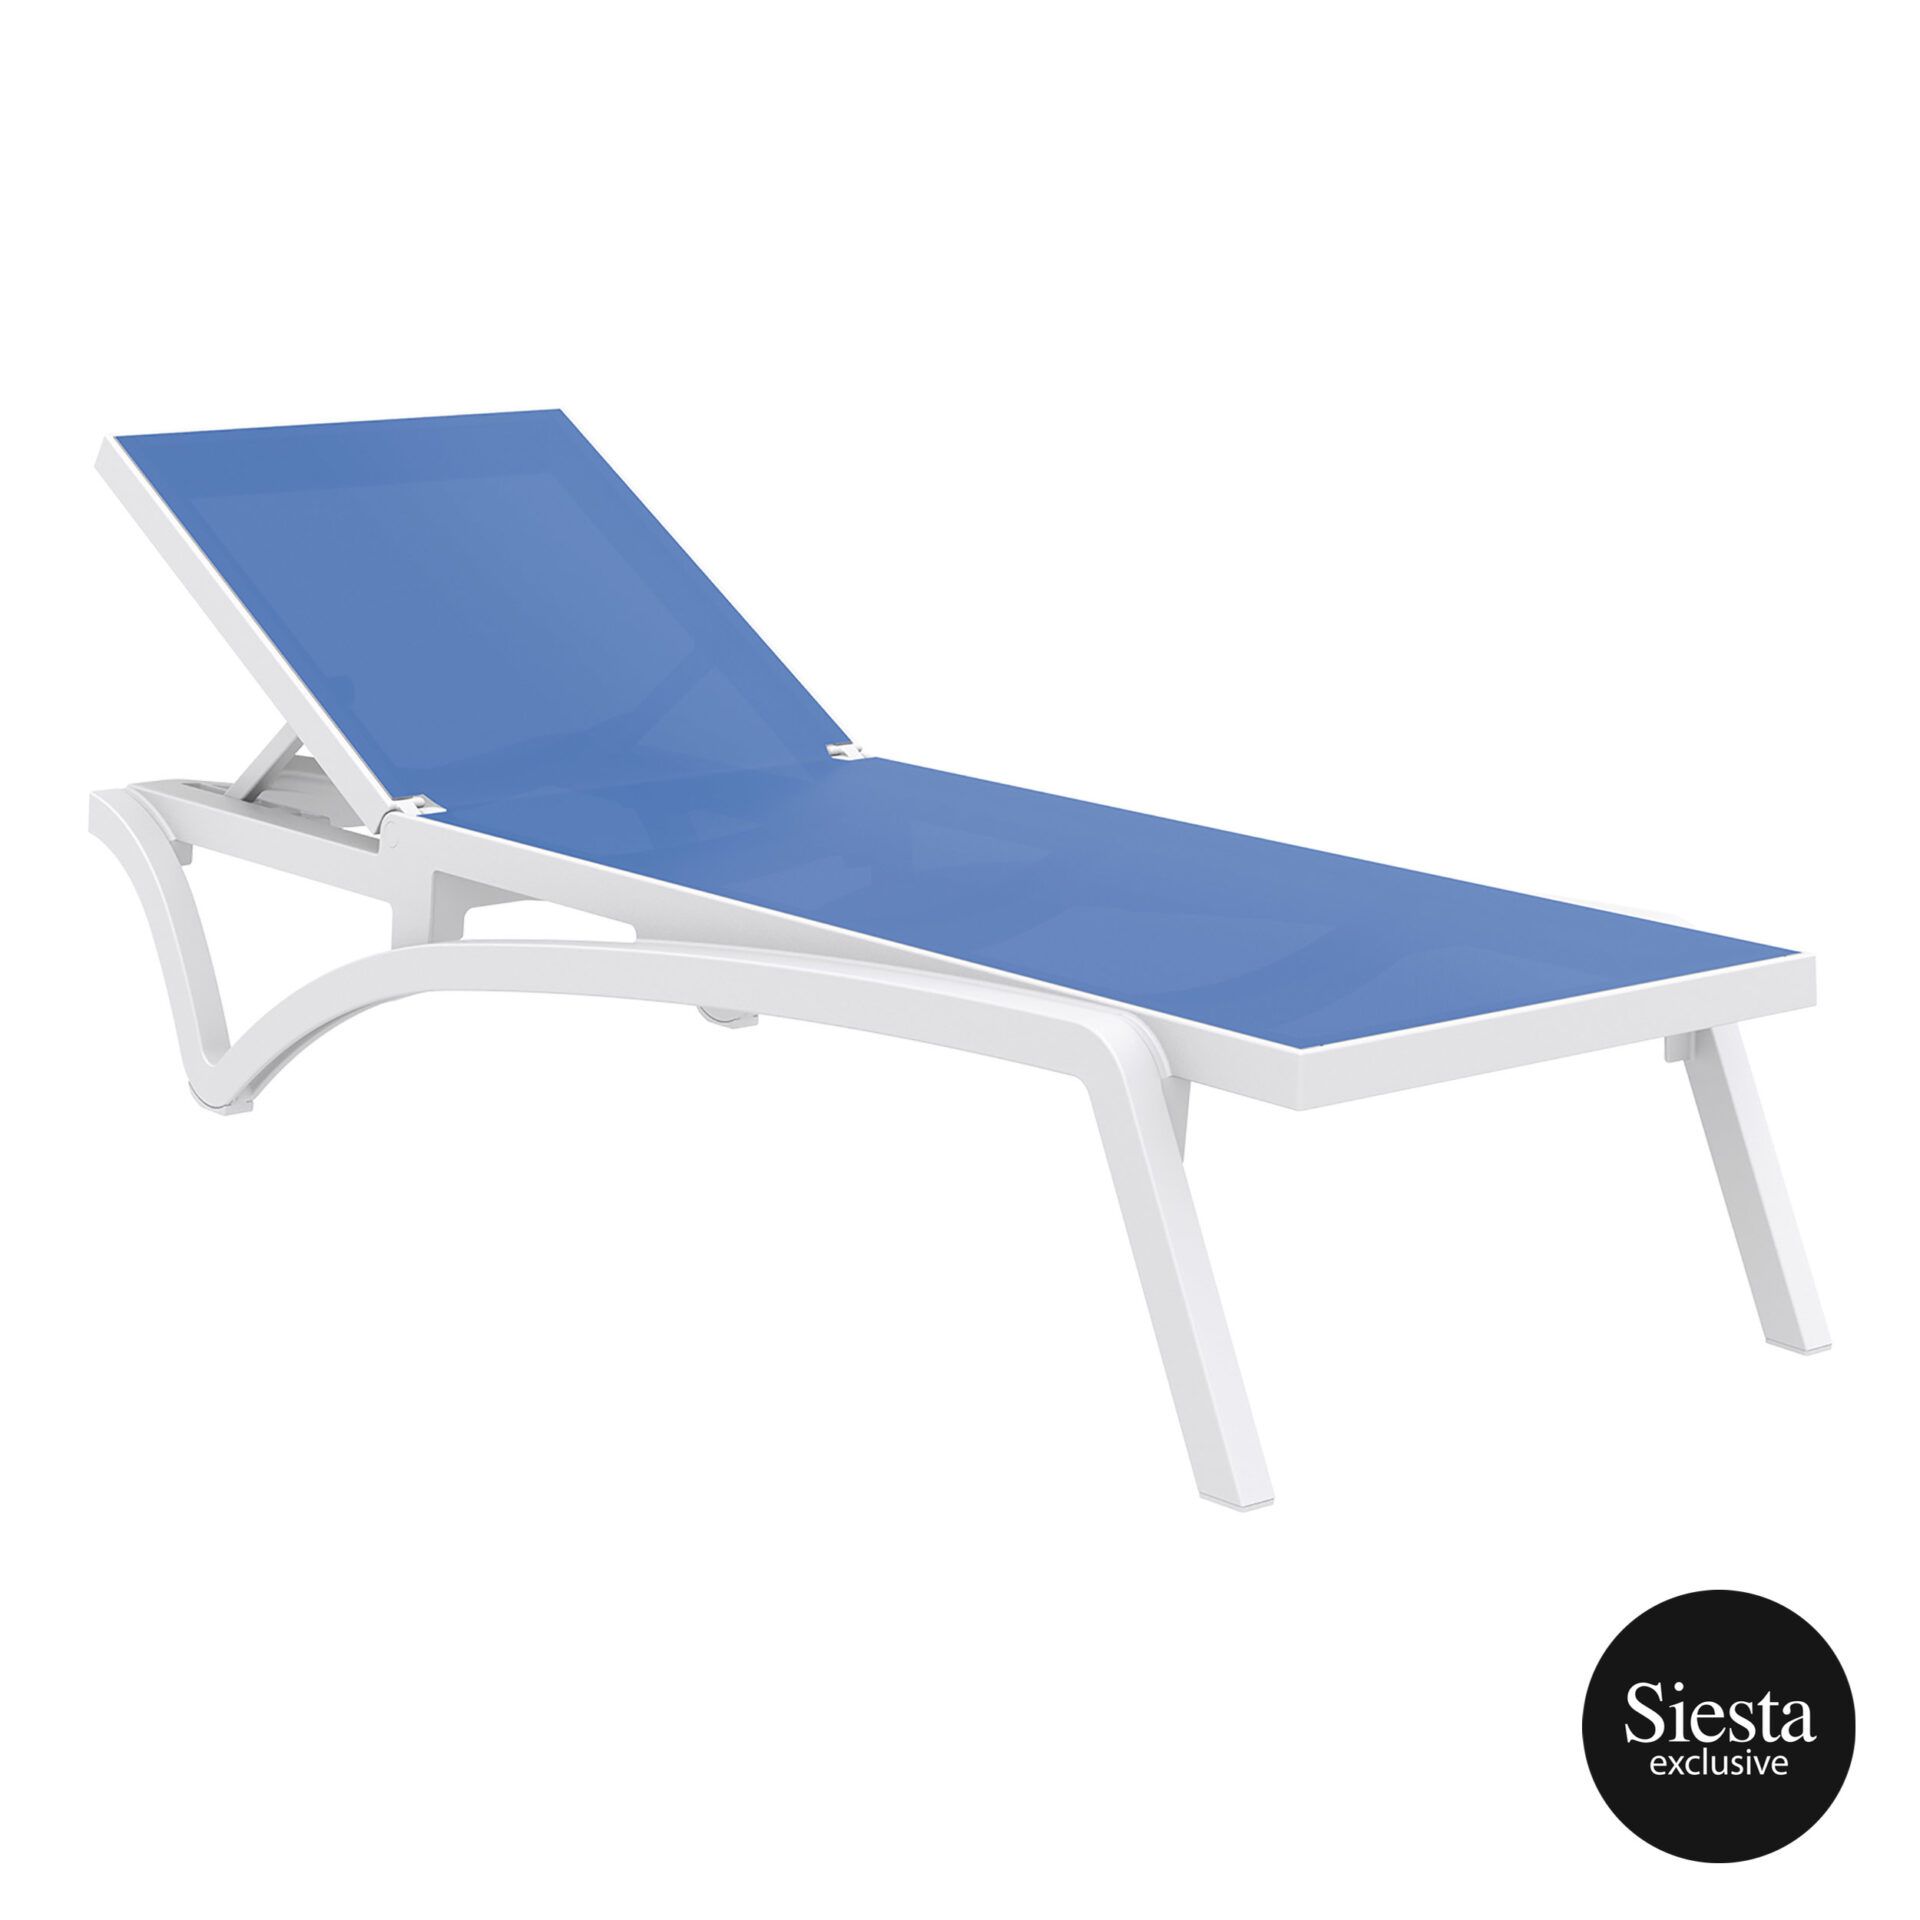 Pacific Sunlounger - White/Blue